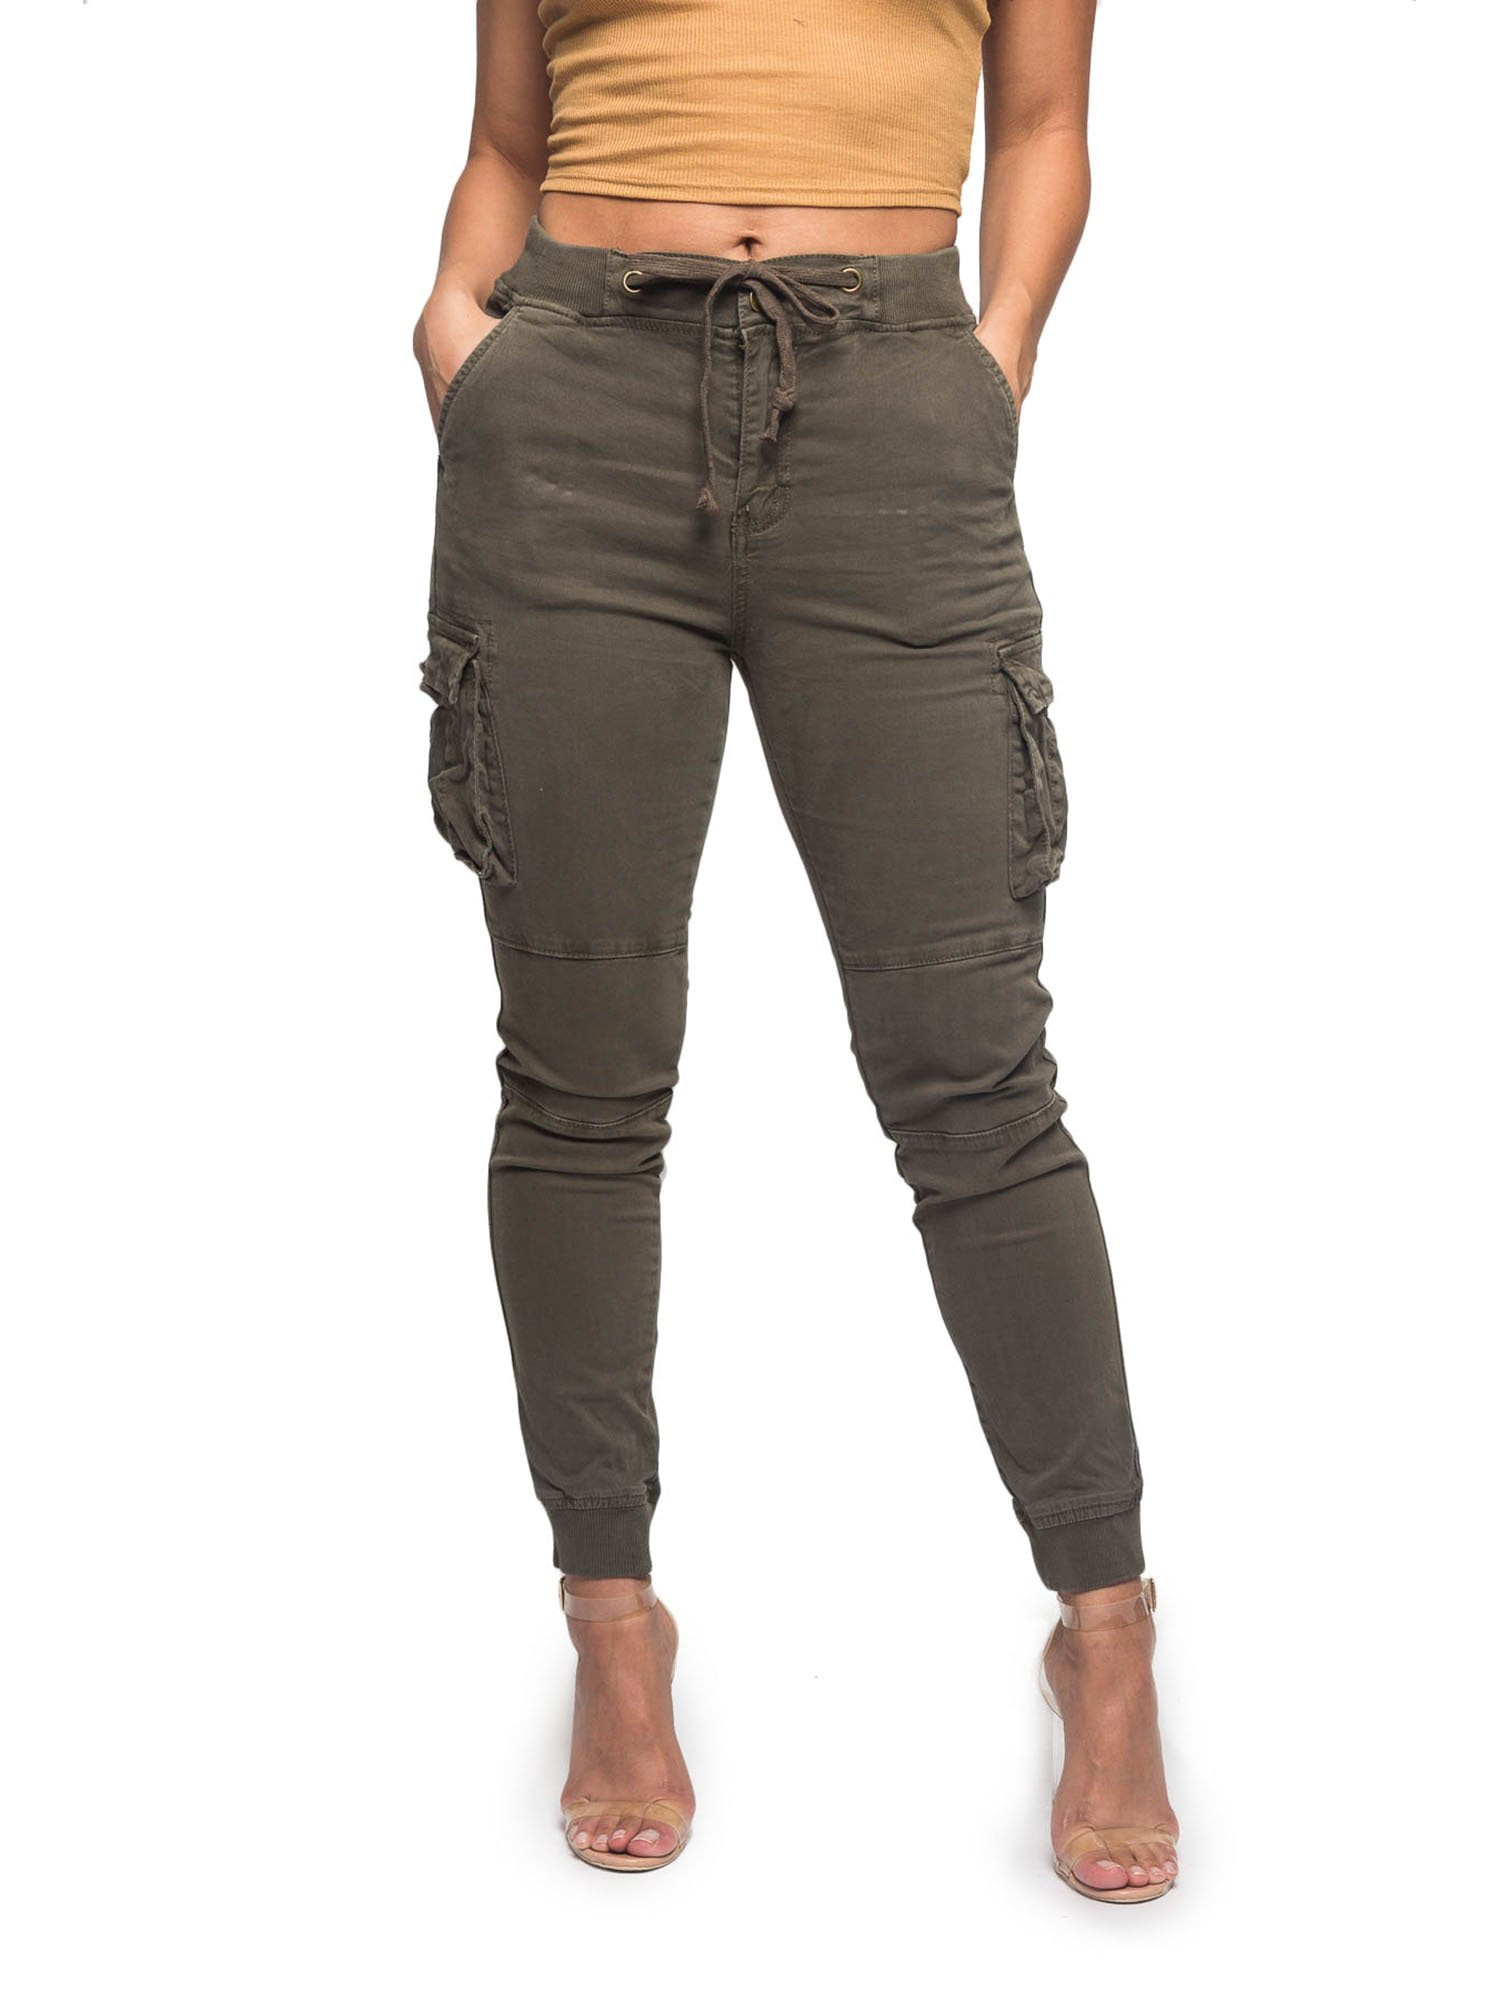 American Bazi Women's High Waisted Cargo Joggers Army Pants RJJ3405 - Olive  - 2X-Large